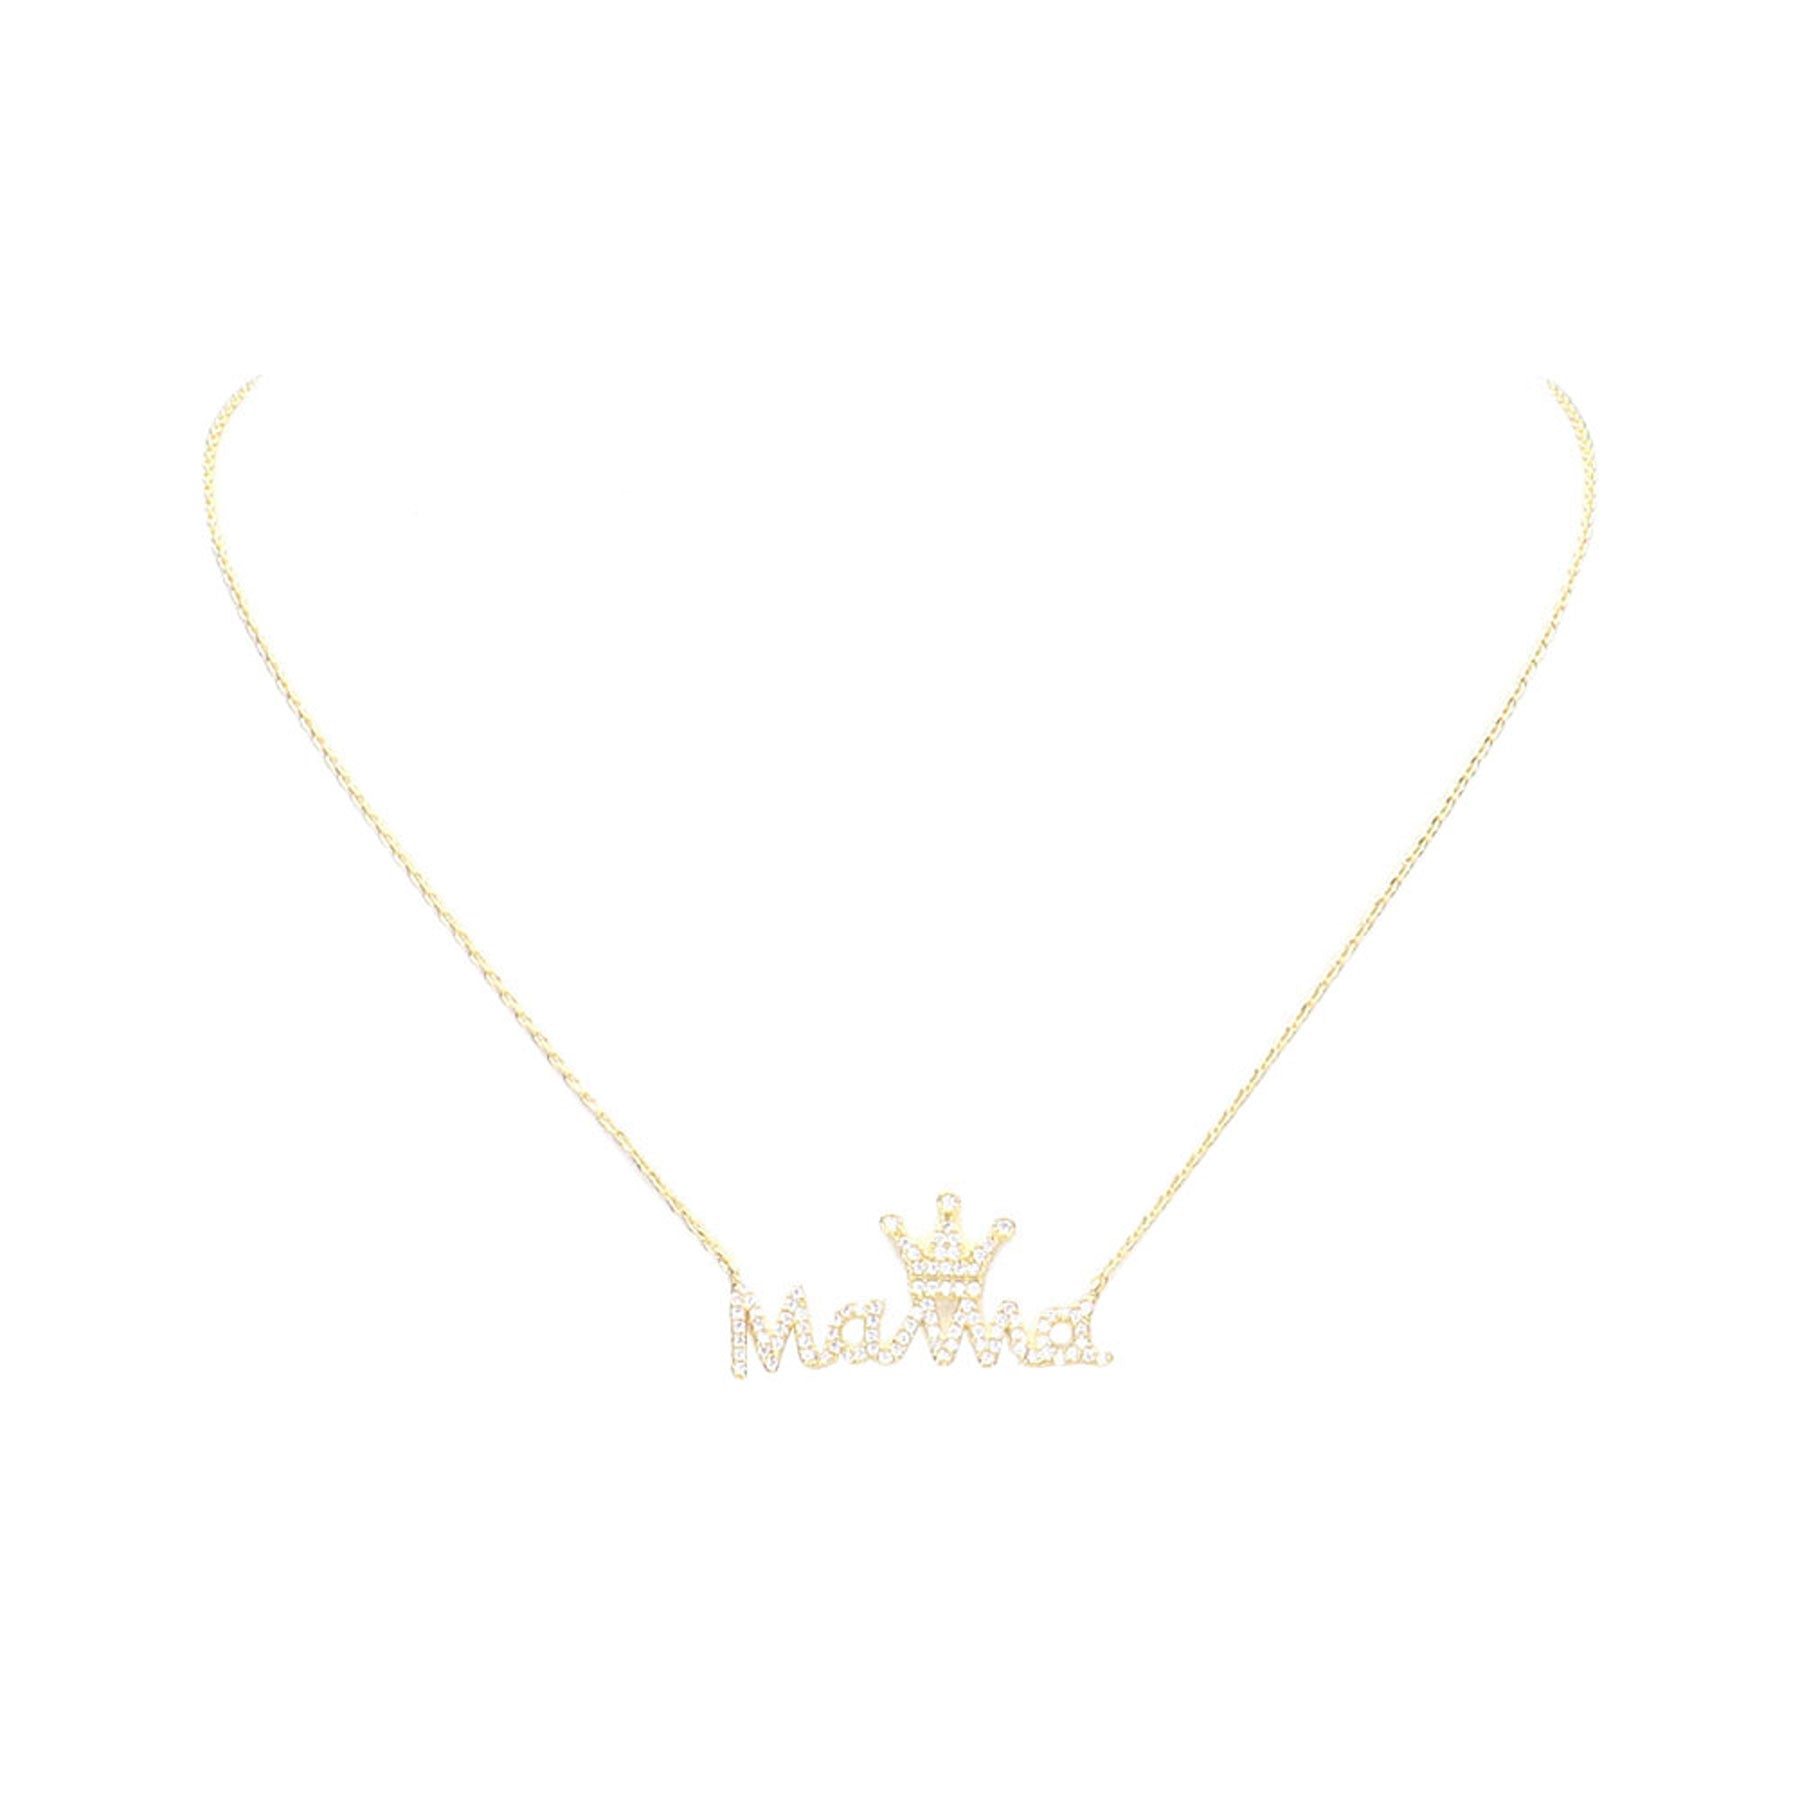 Gold Dipped CZ Crown MAMA Message Pendant Necklace, Make your Mom feel special with this gorgeous Dipped Crown Pendant Necklace gift! Her heart will swell with joy! This piece is versatile and goes with practically anything! This Crown MAMA Pendant Necklace is perfect Mother's Day gift for all the special women in your life, be it mother, wife, sister or daughter.